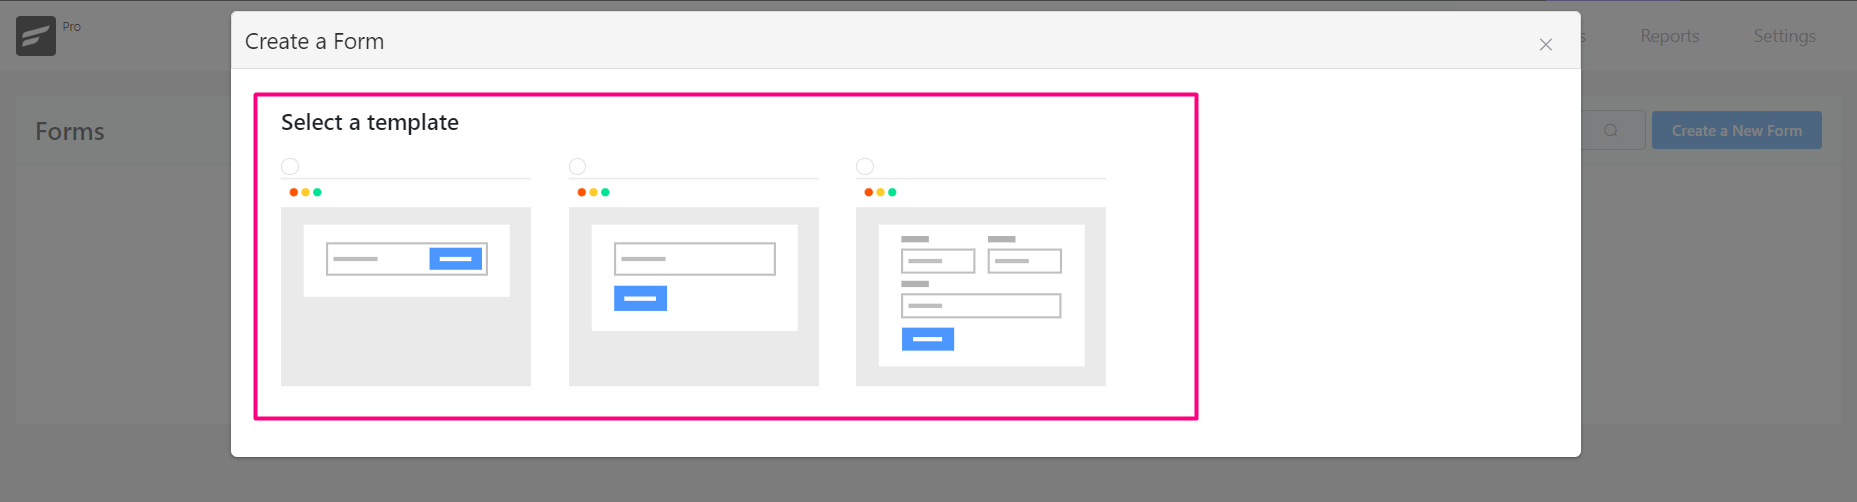 crm form select template